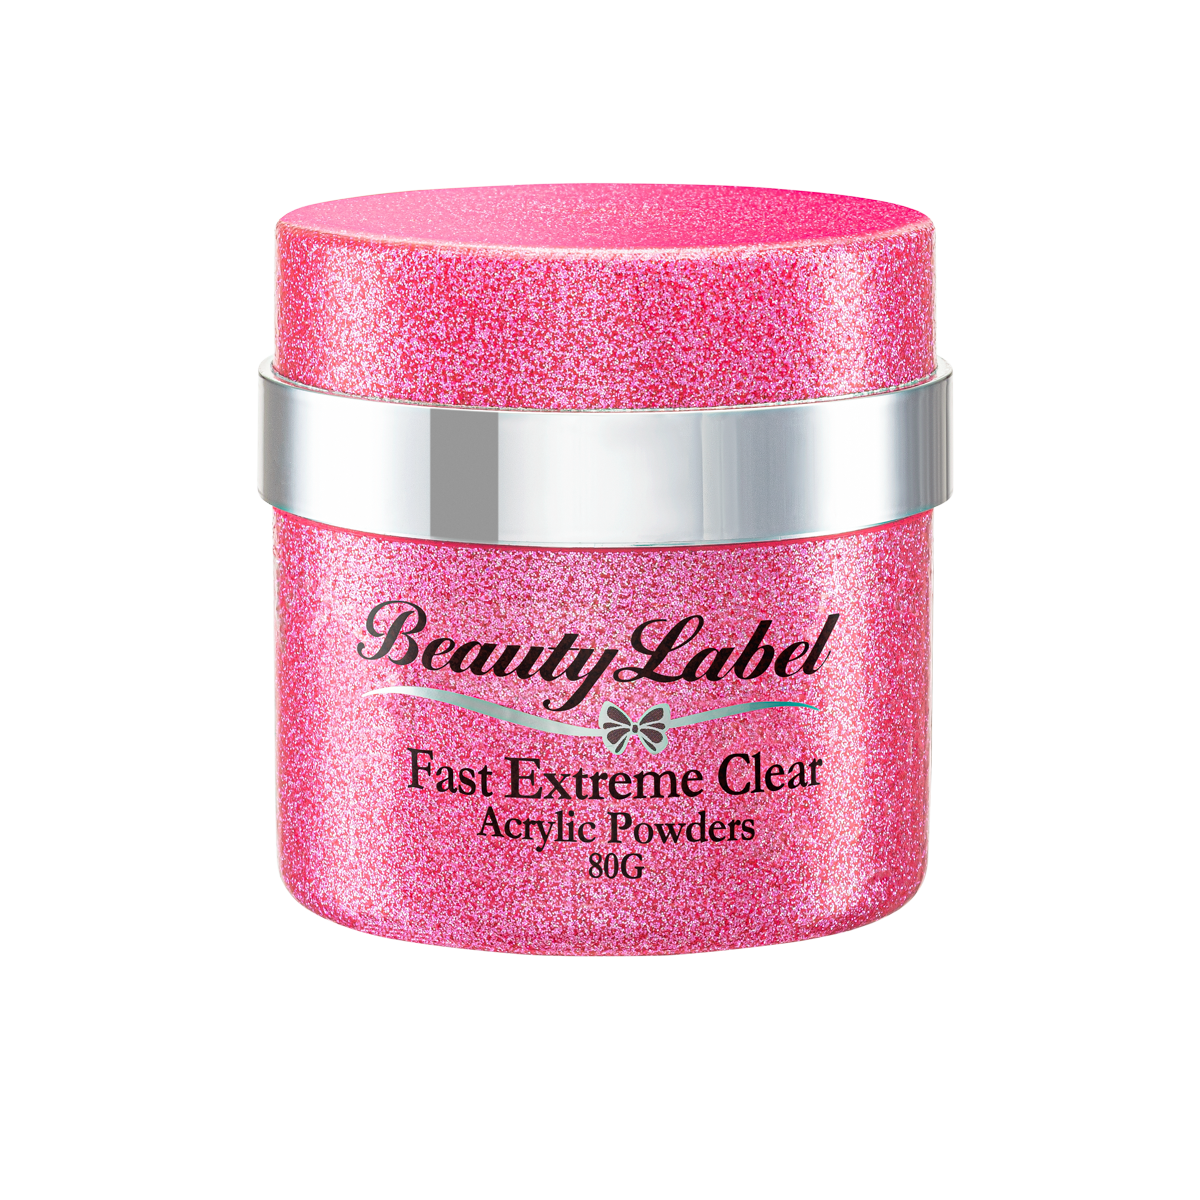 Beauty Label Acrylic Powder - Fast Extreme Clear 